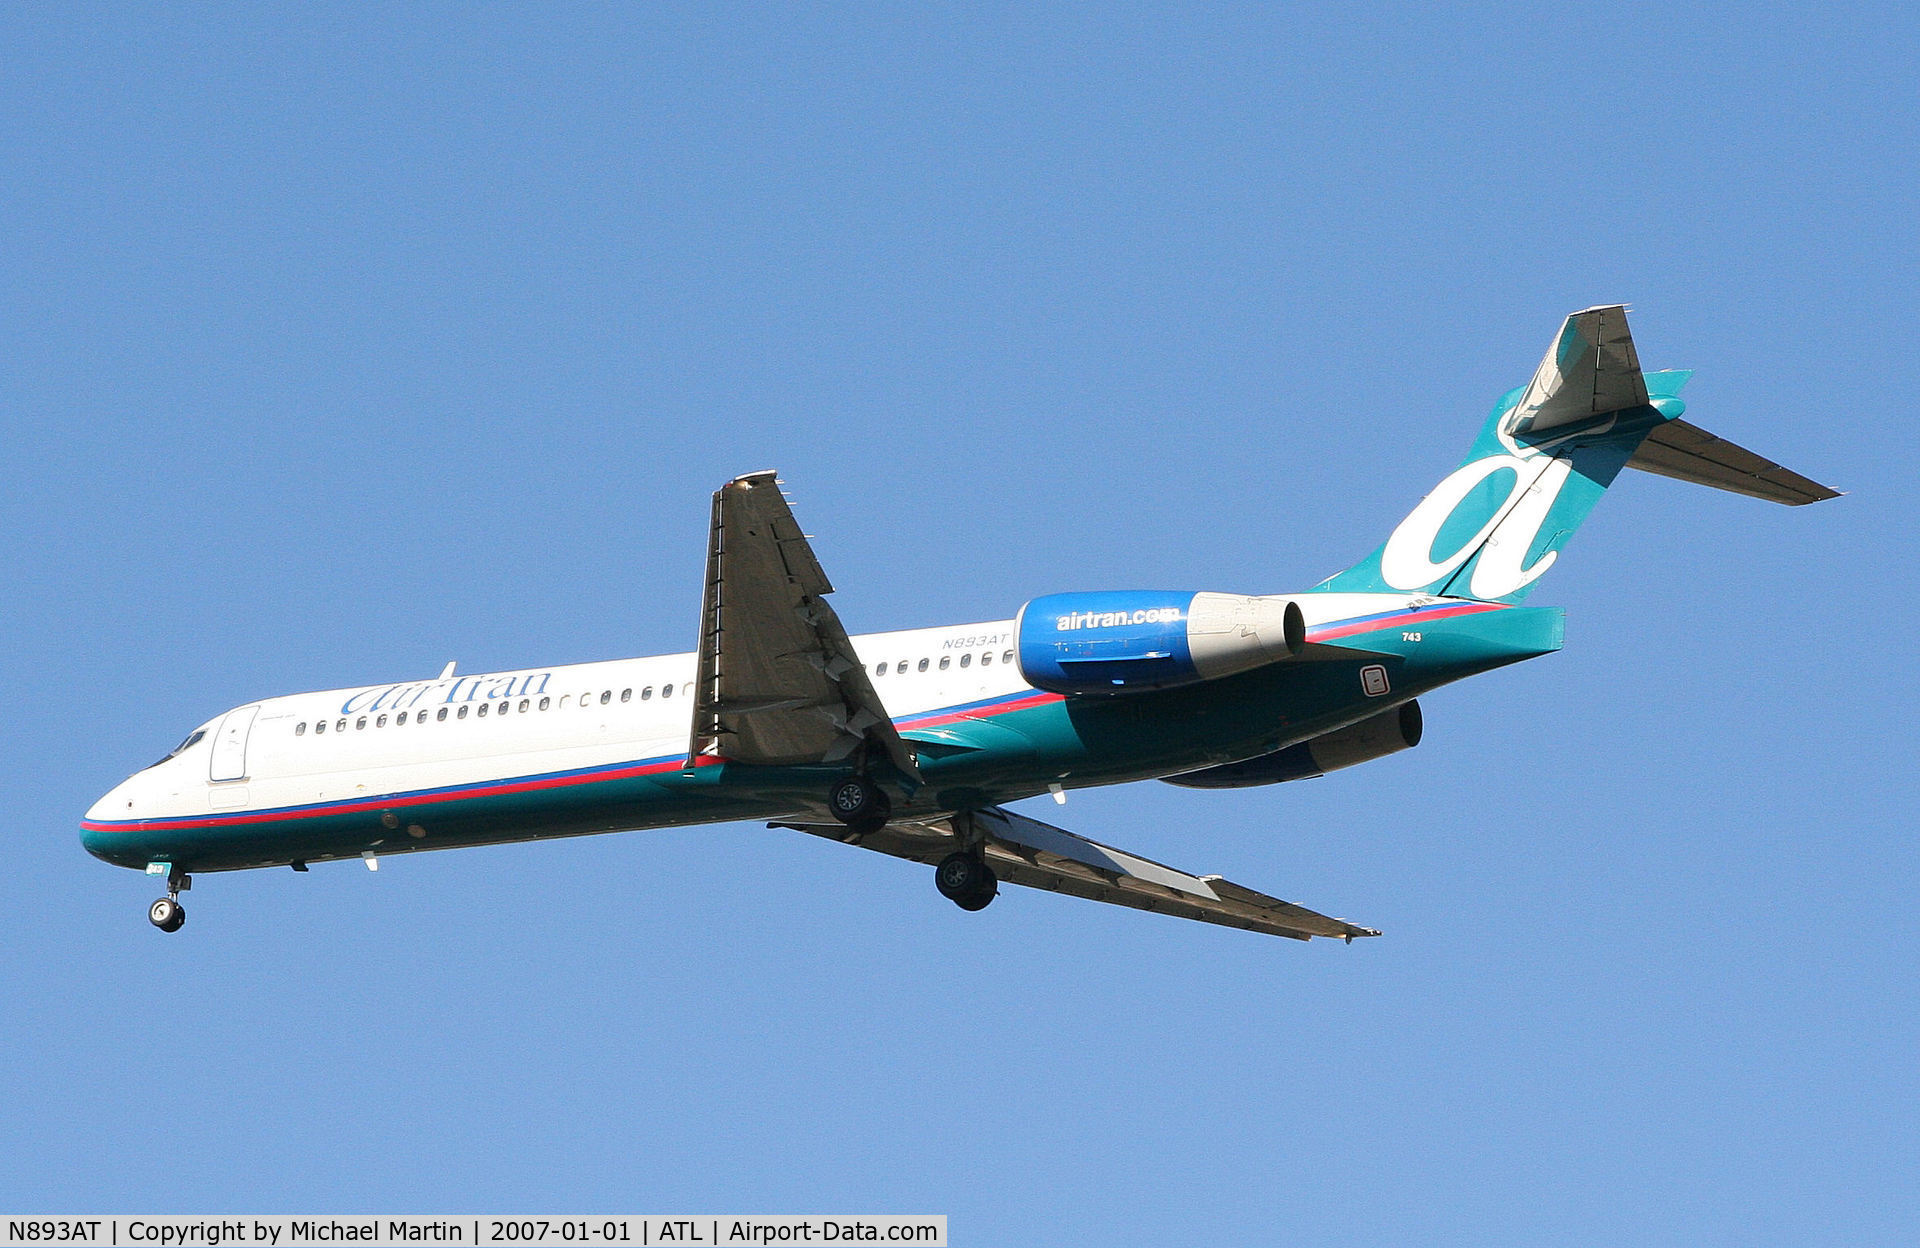 N893AT, 2004 Boeing 717-200 C/N 55045, Over the numbers of 26L